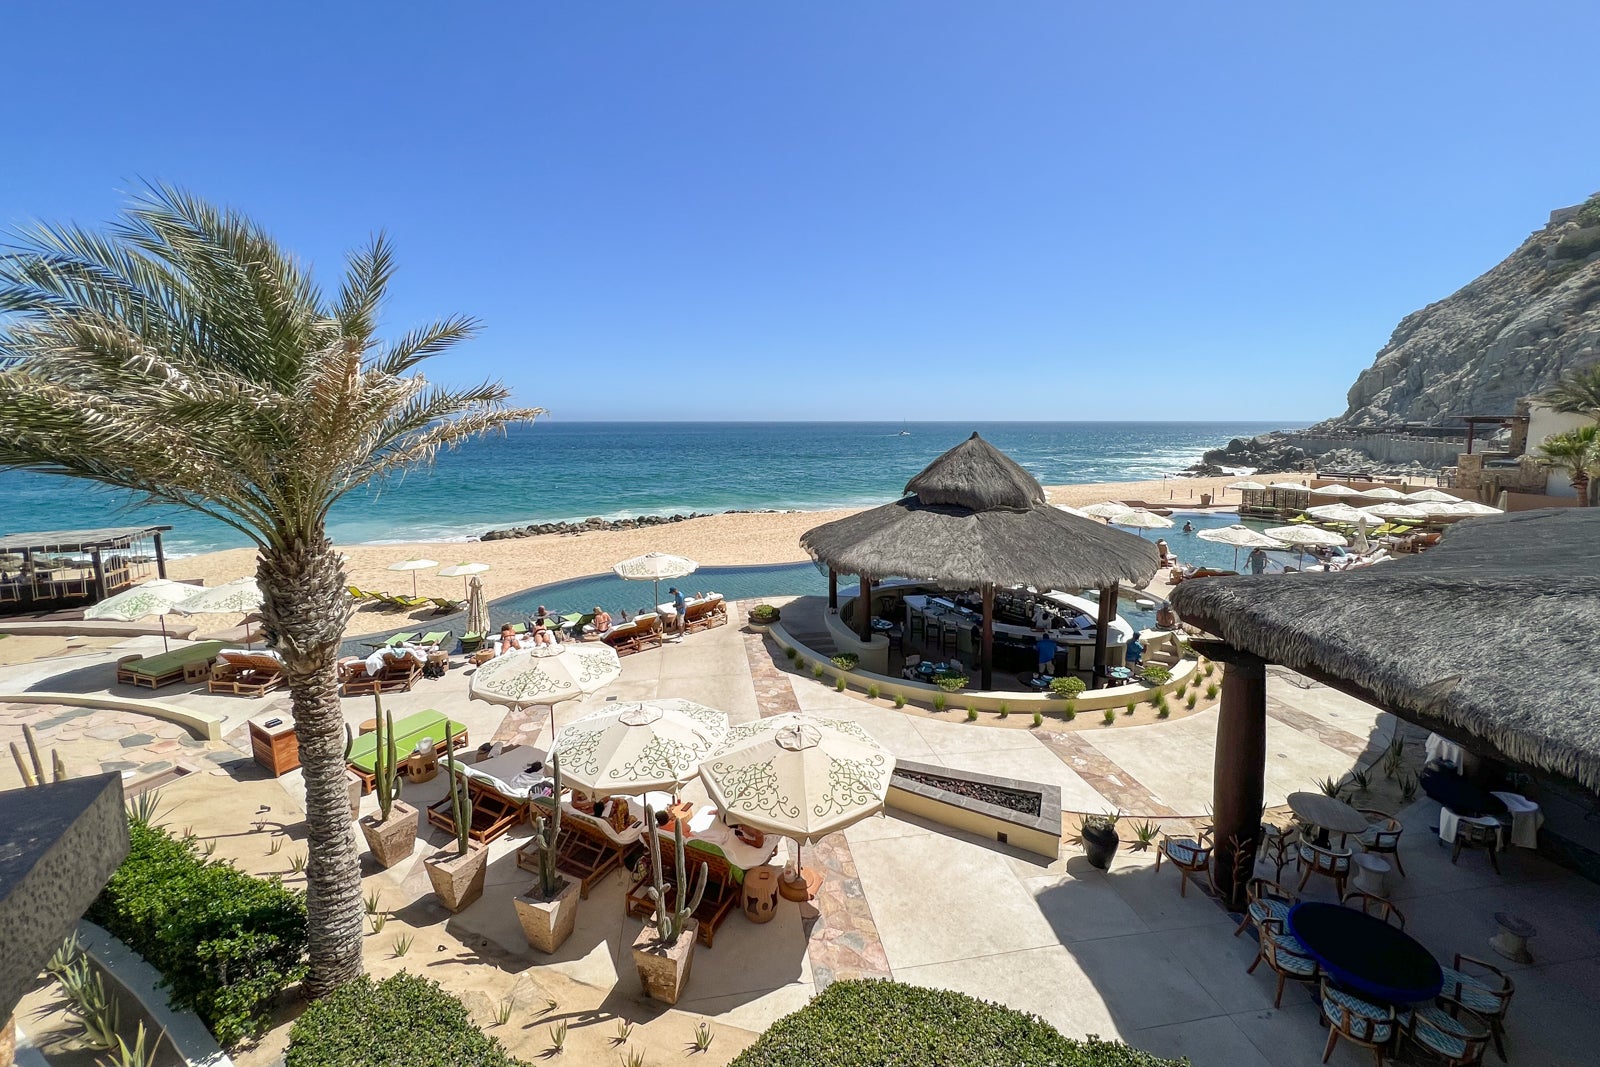 Capella Pedregal Resort Might Just Be Cabo San Lucas' Best Five